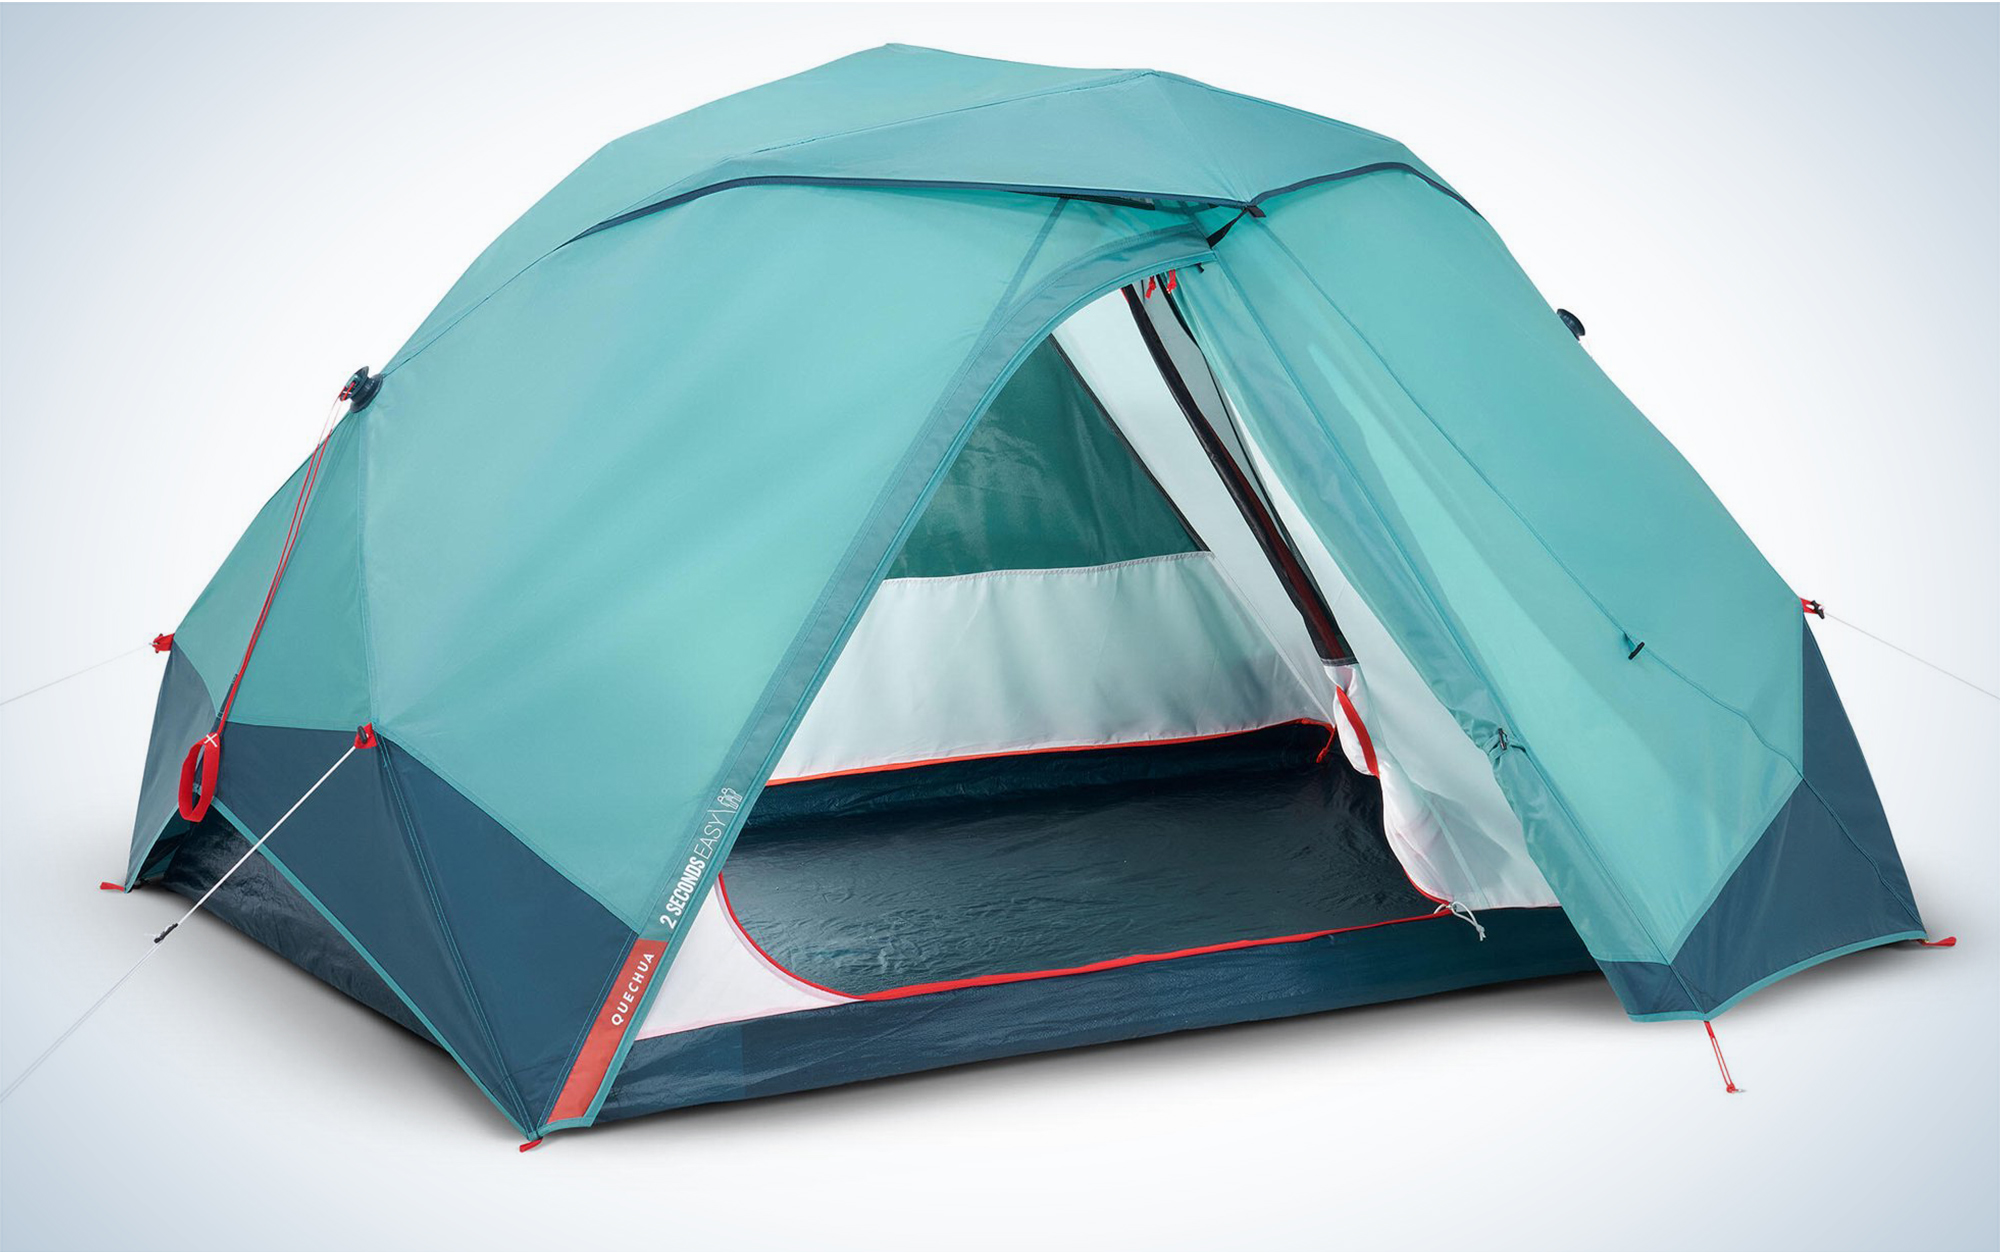 The Decathlon Quechua 2 Second Pop-Up is one of the best camping tents.